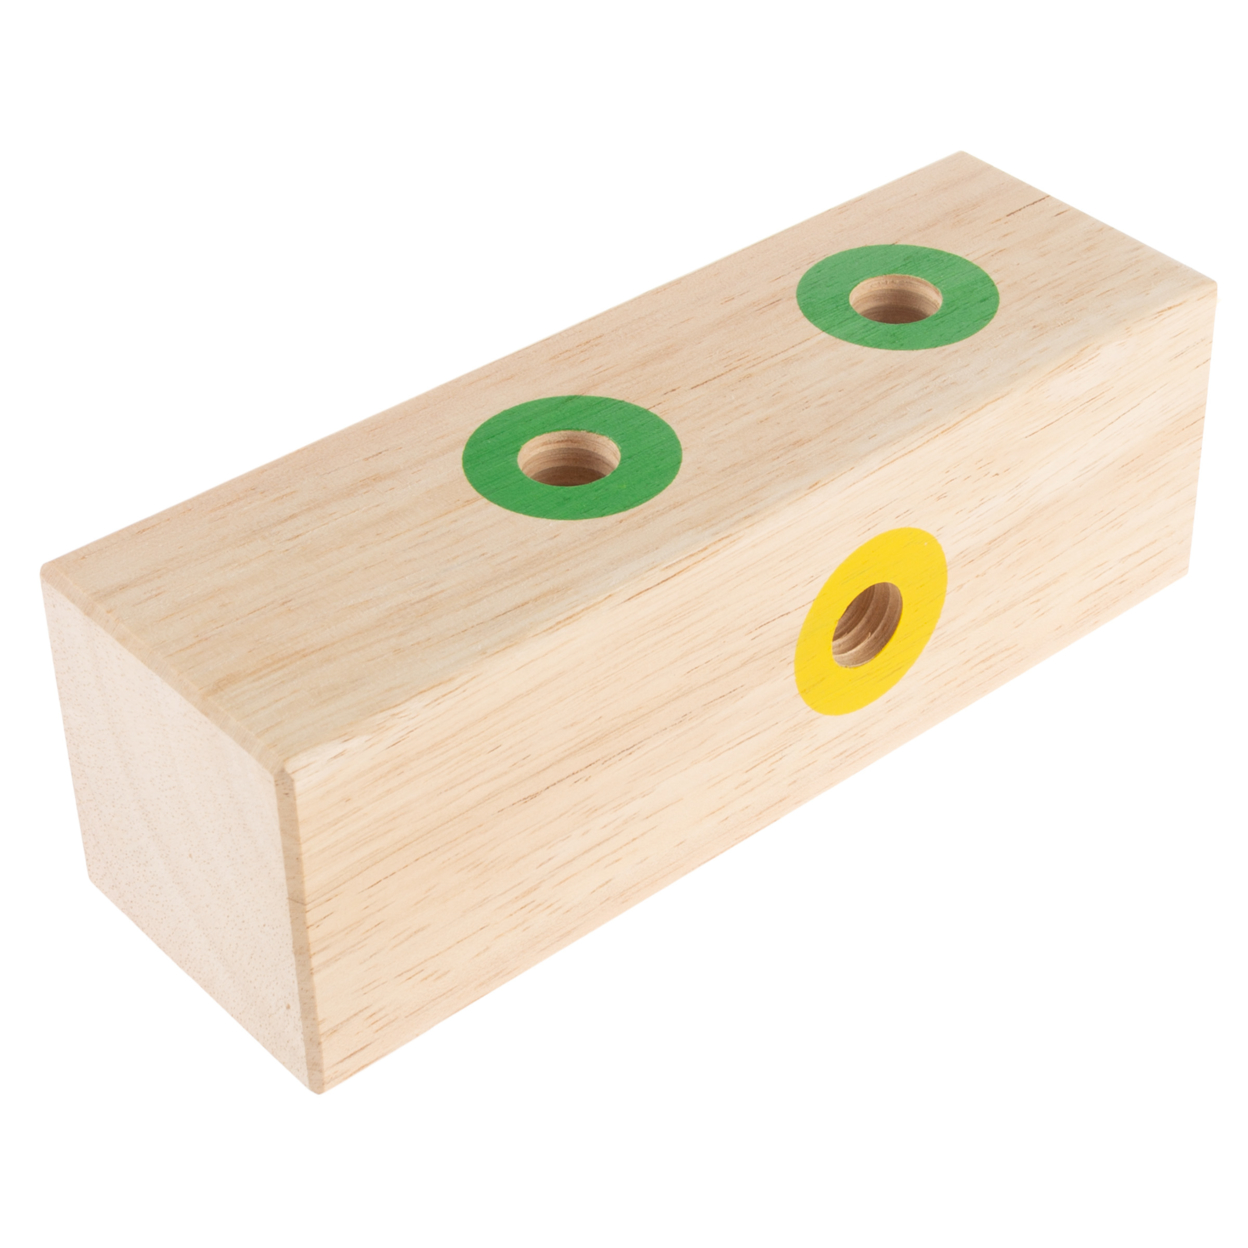 Screw Block Toy- Kids Wooden Screws And Screwdriver-Fun Fine Motor Development Activity For Boys And Girls